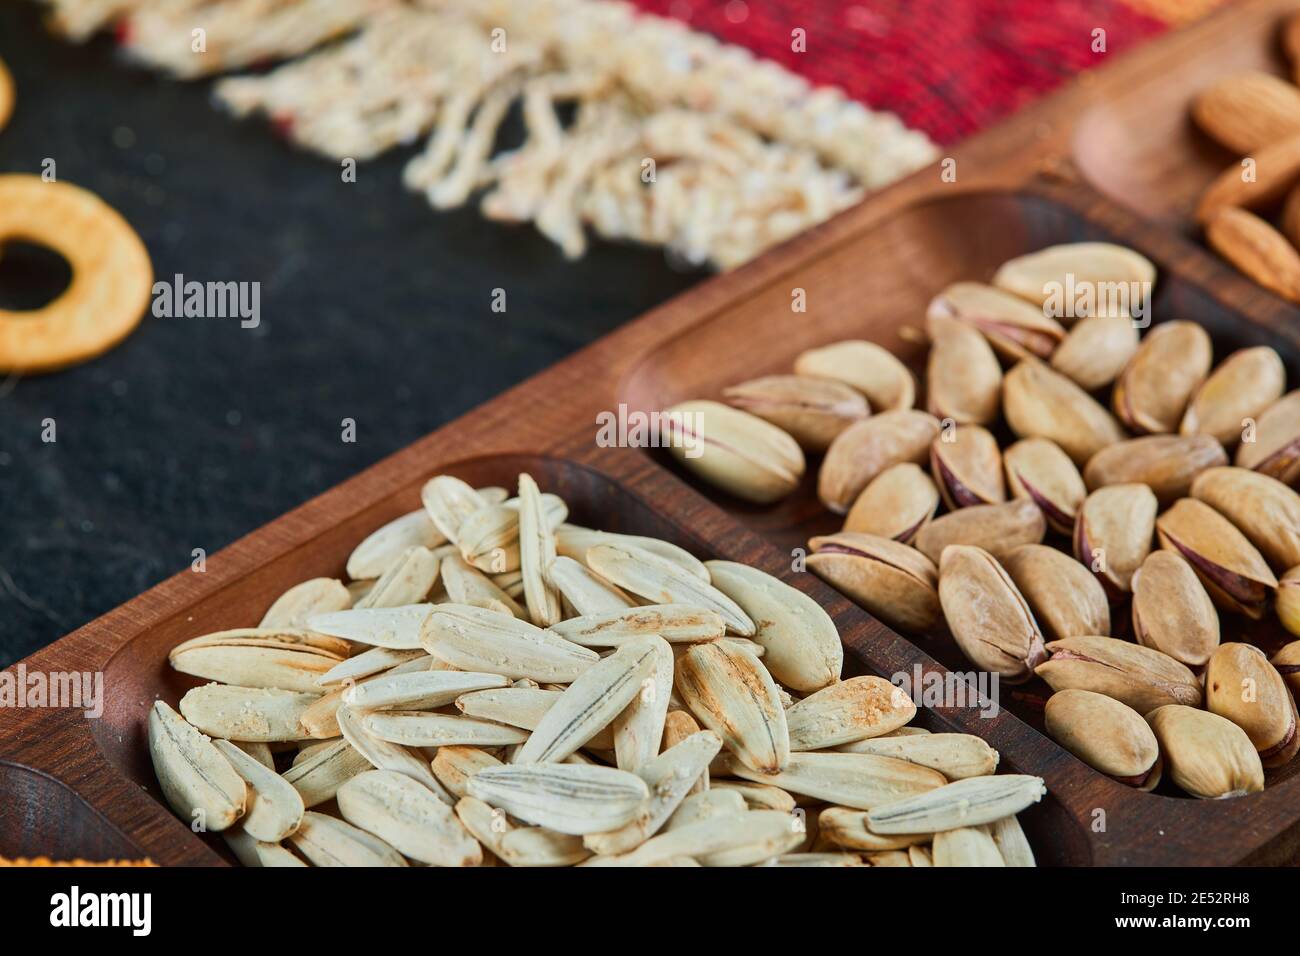 Pistachios, almonds and sunflower seeds on wooden plate Stock Photo